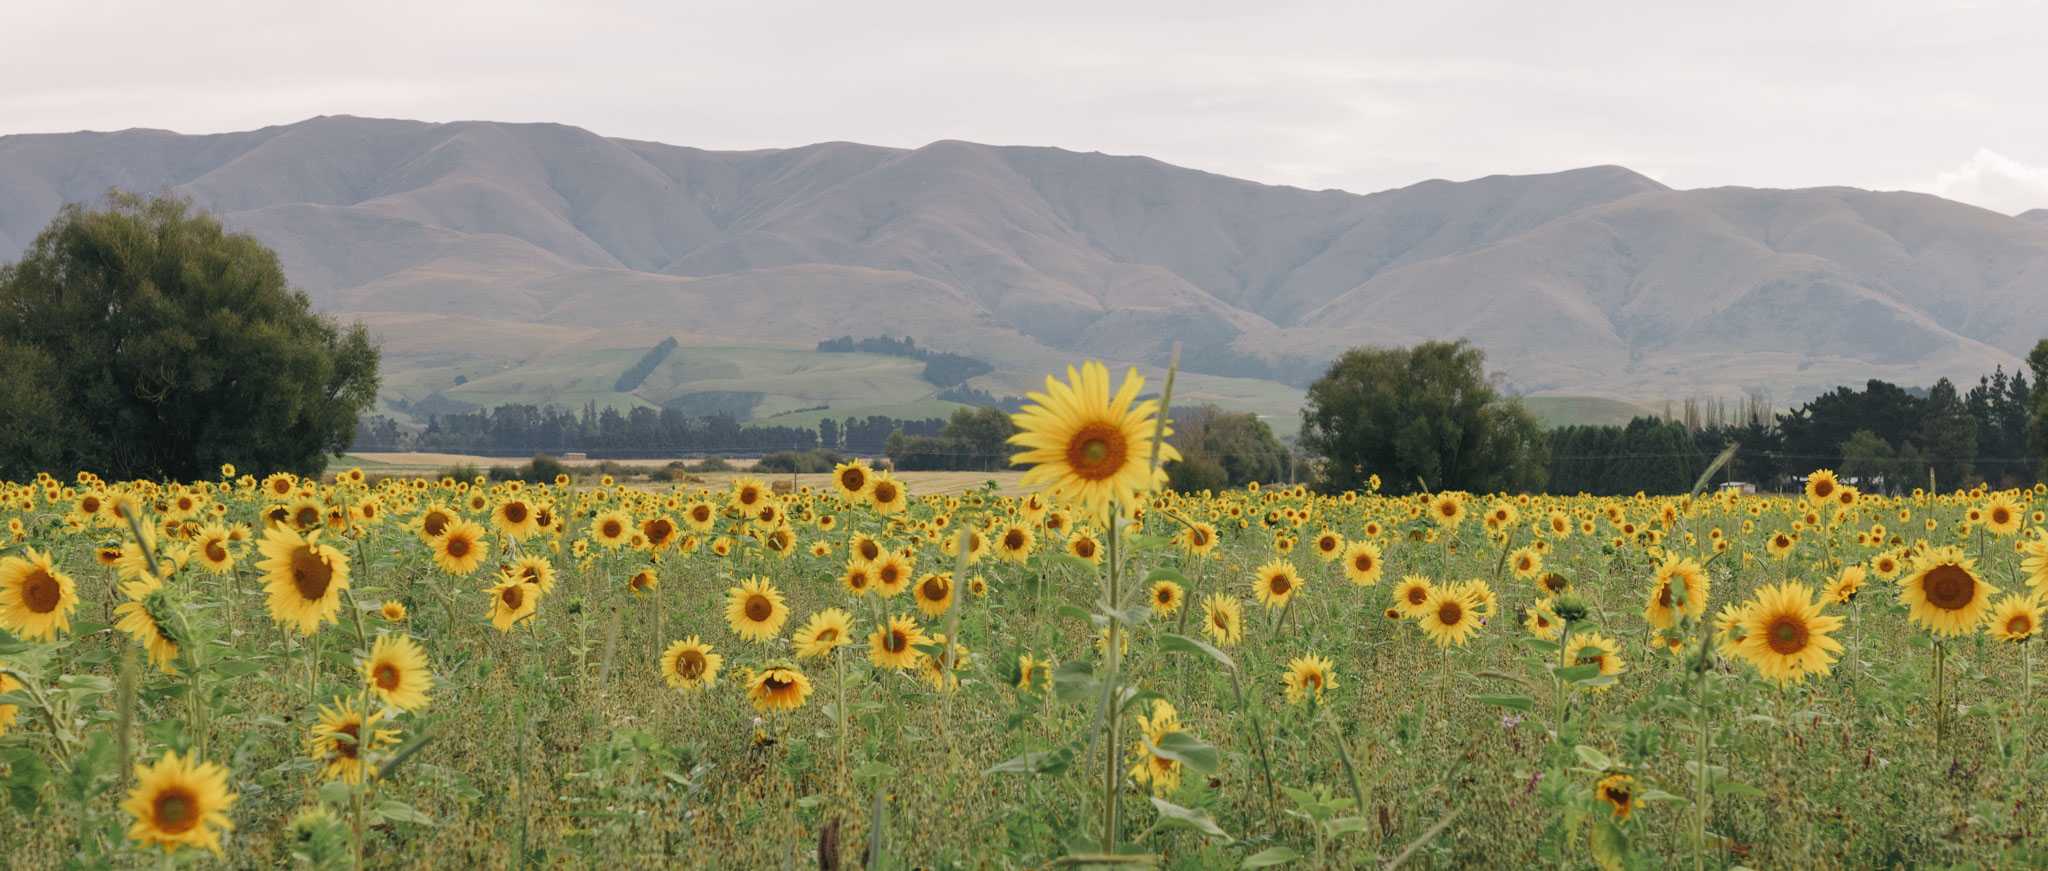 Sunflowers at Fairlie Town